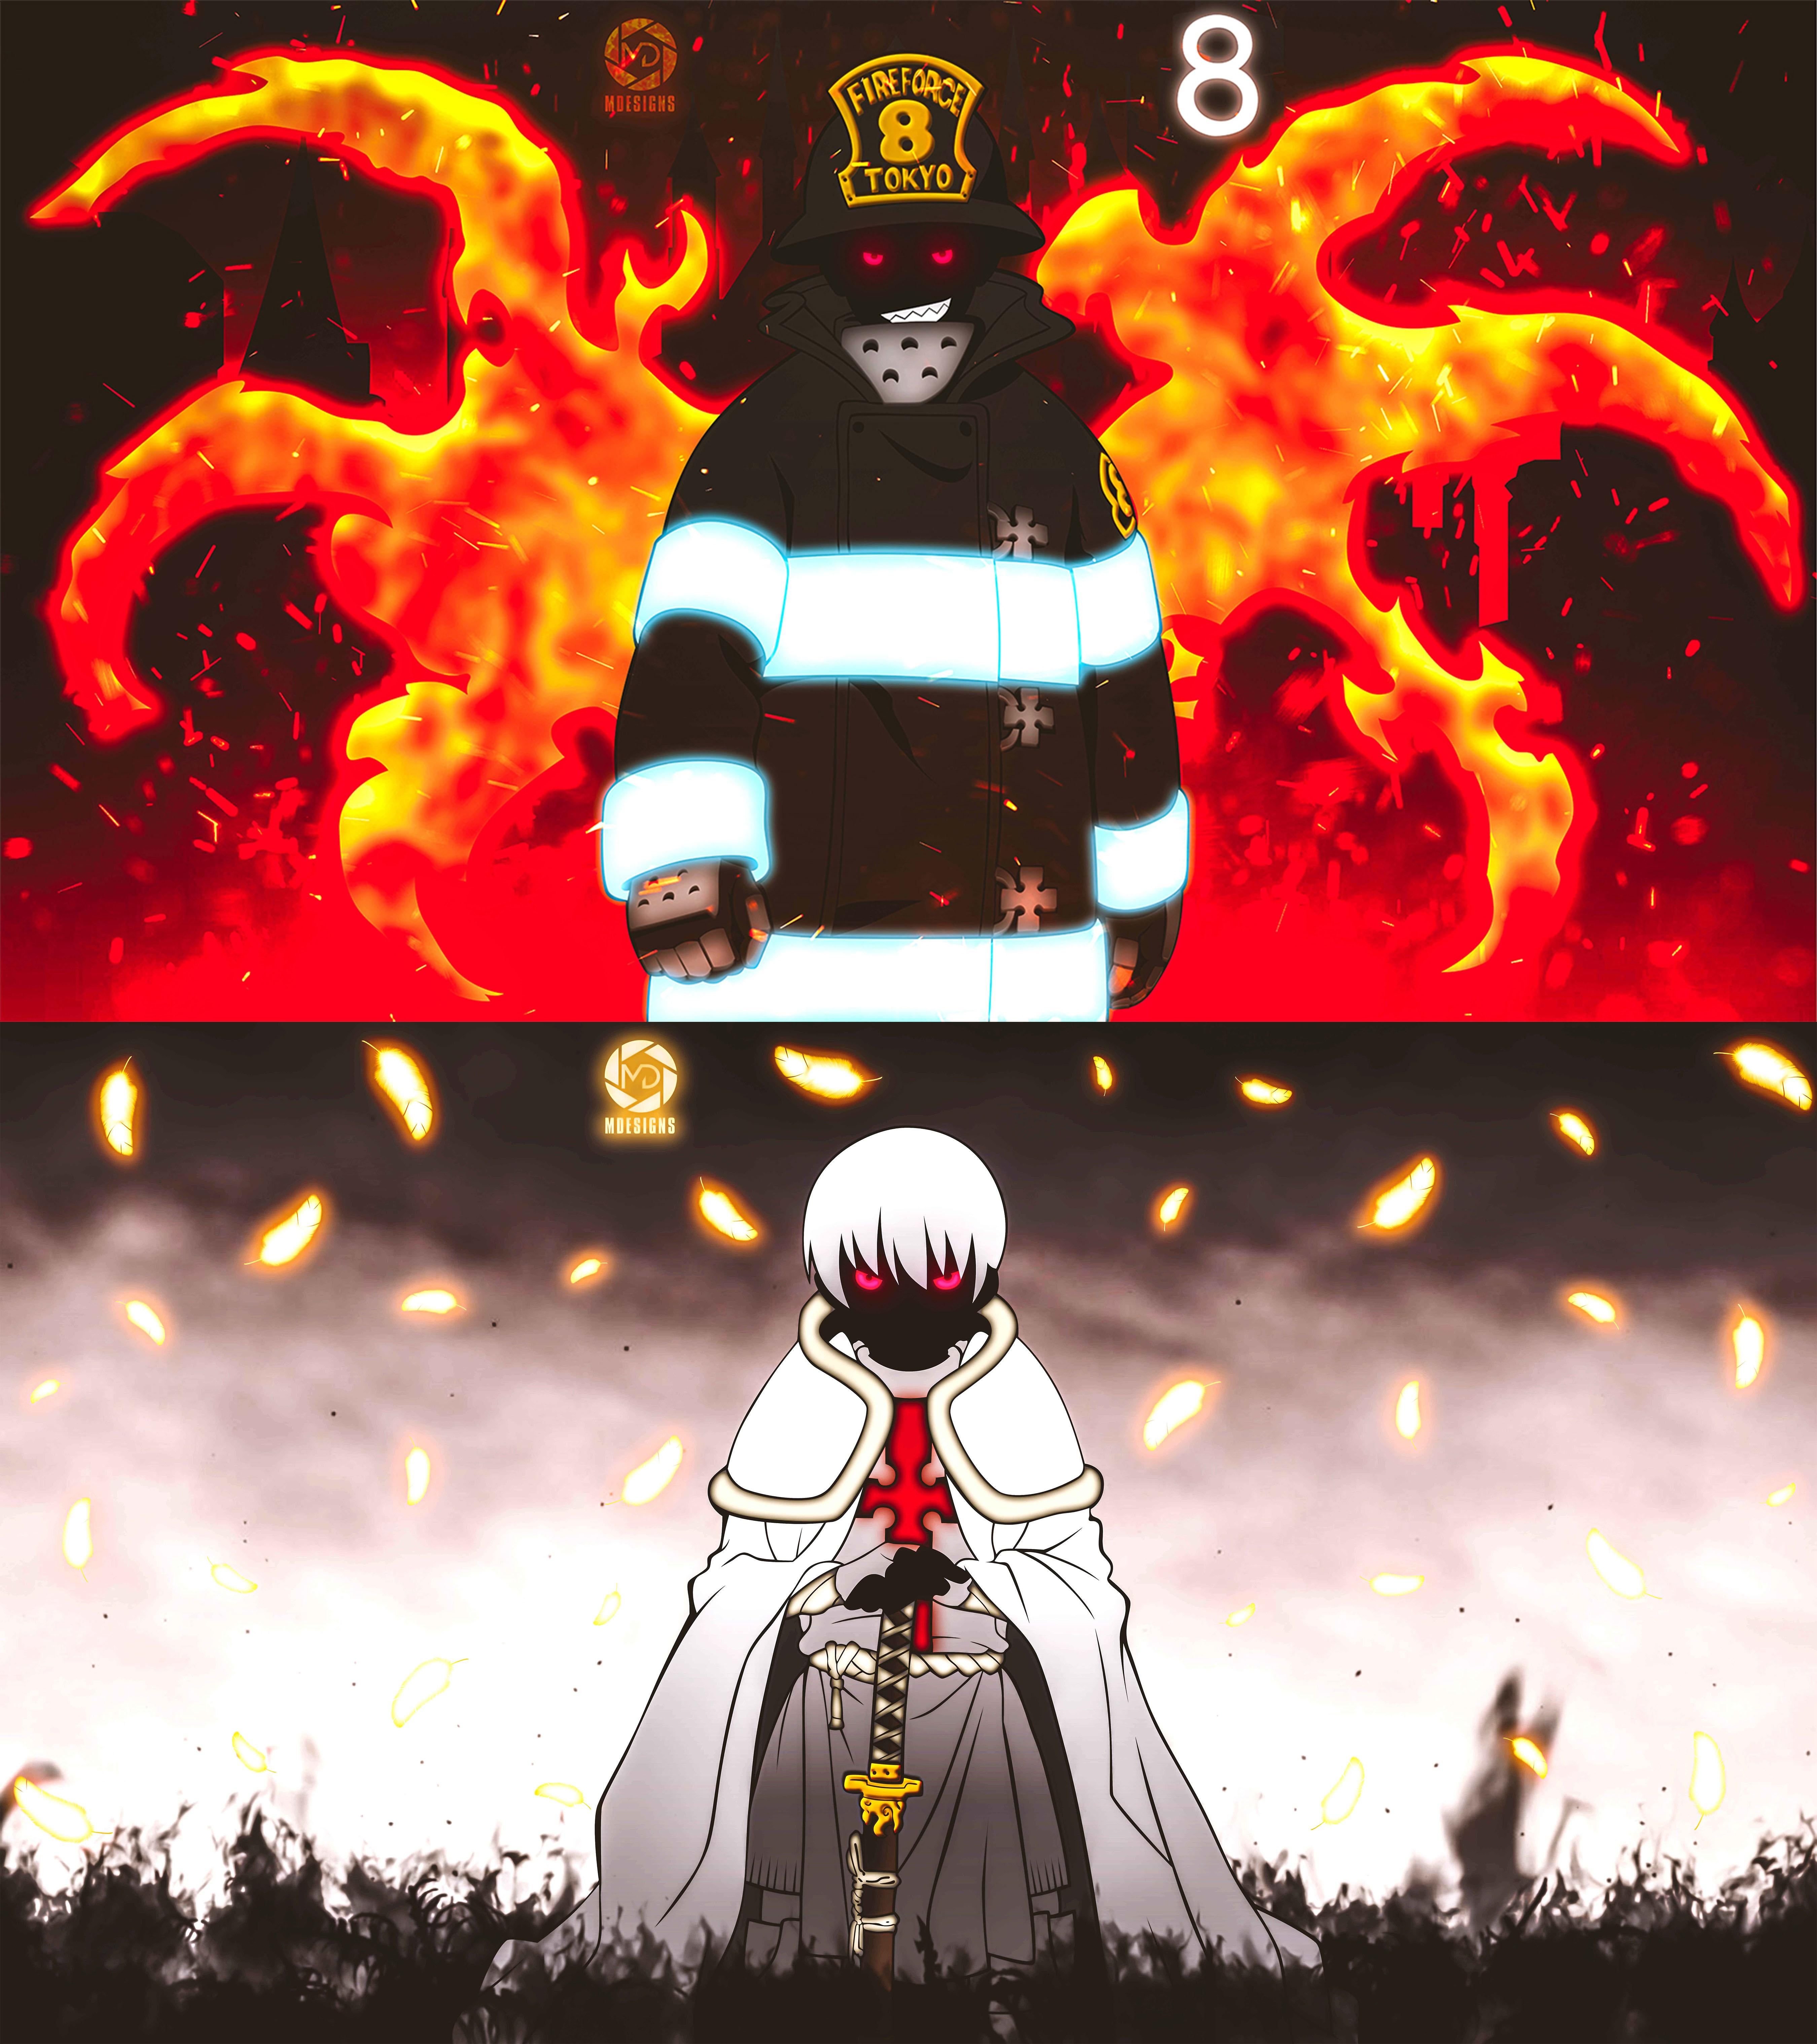 I made these wallpaper for Shinra and Sho from Fire Force